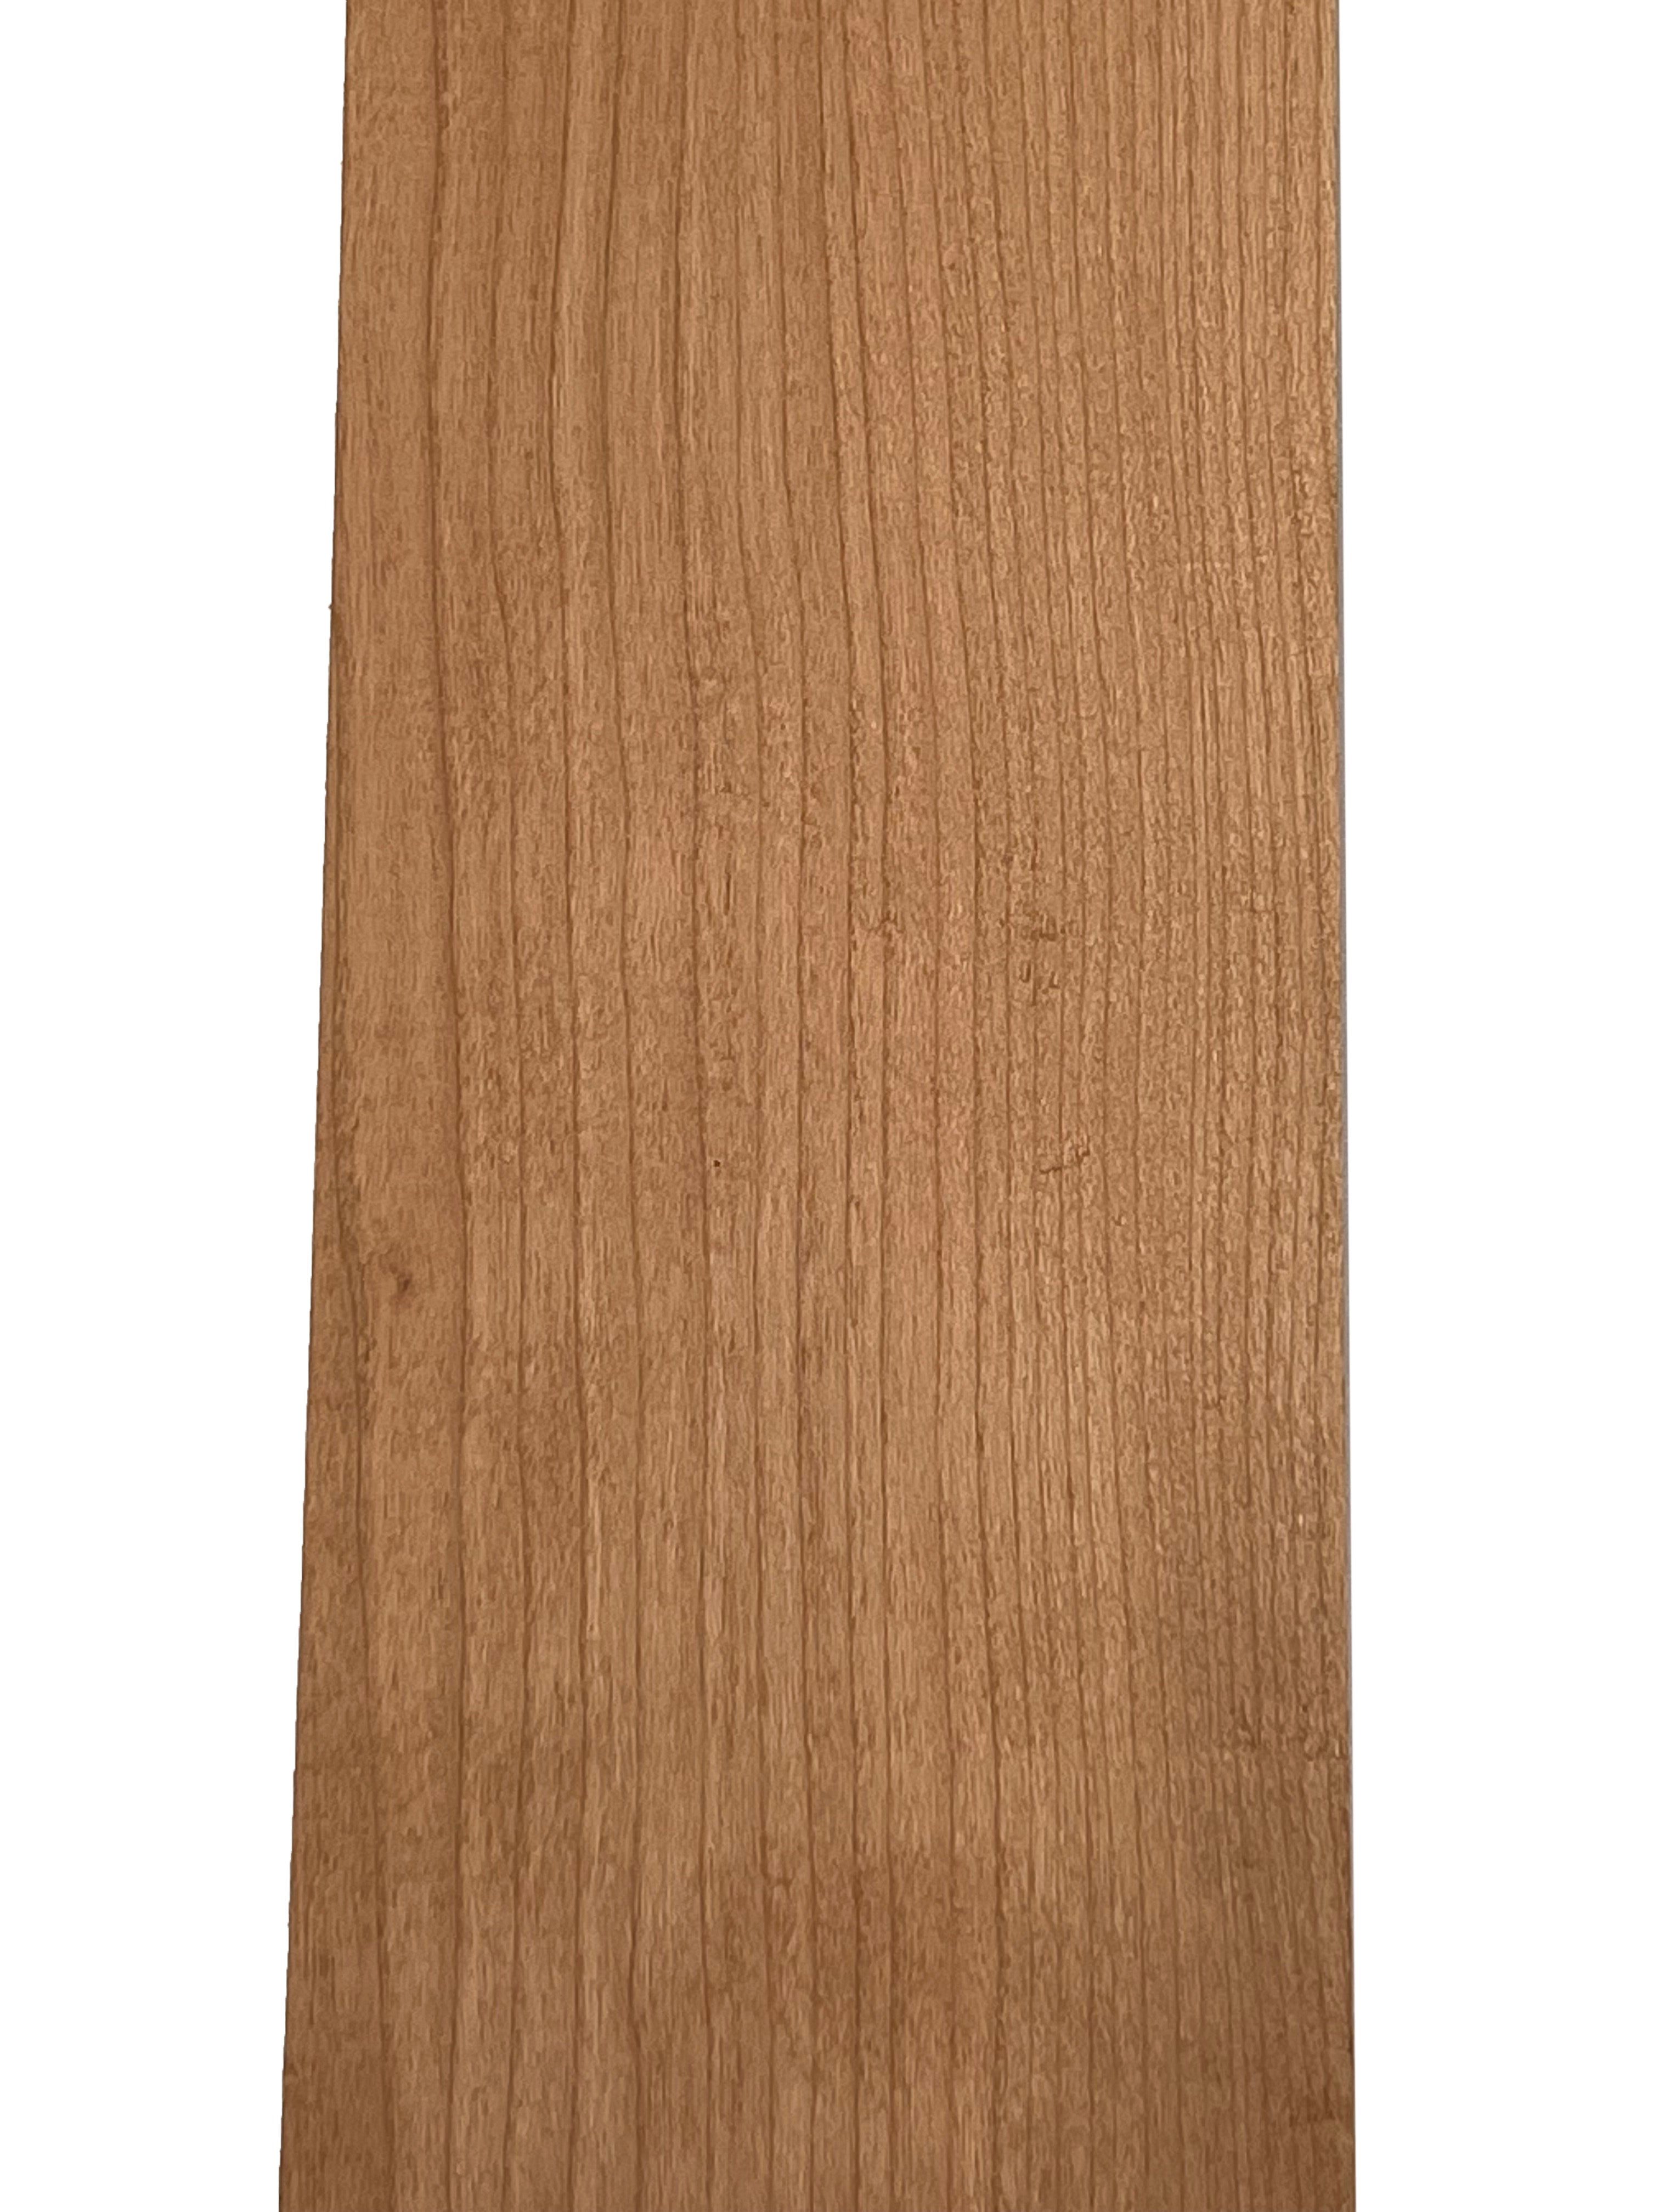 Combo Pack 5 ,Cherry Guitar Neck Blanks 30” x 3” x 1” - Exotic Wood Zone - Buy online Across USA 